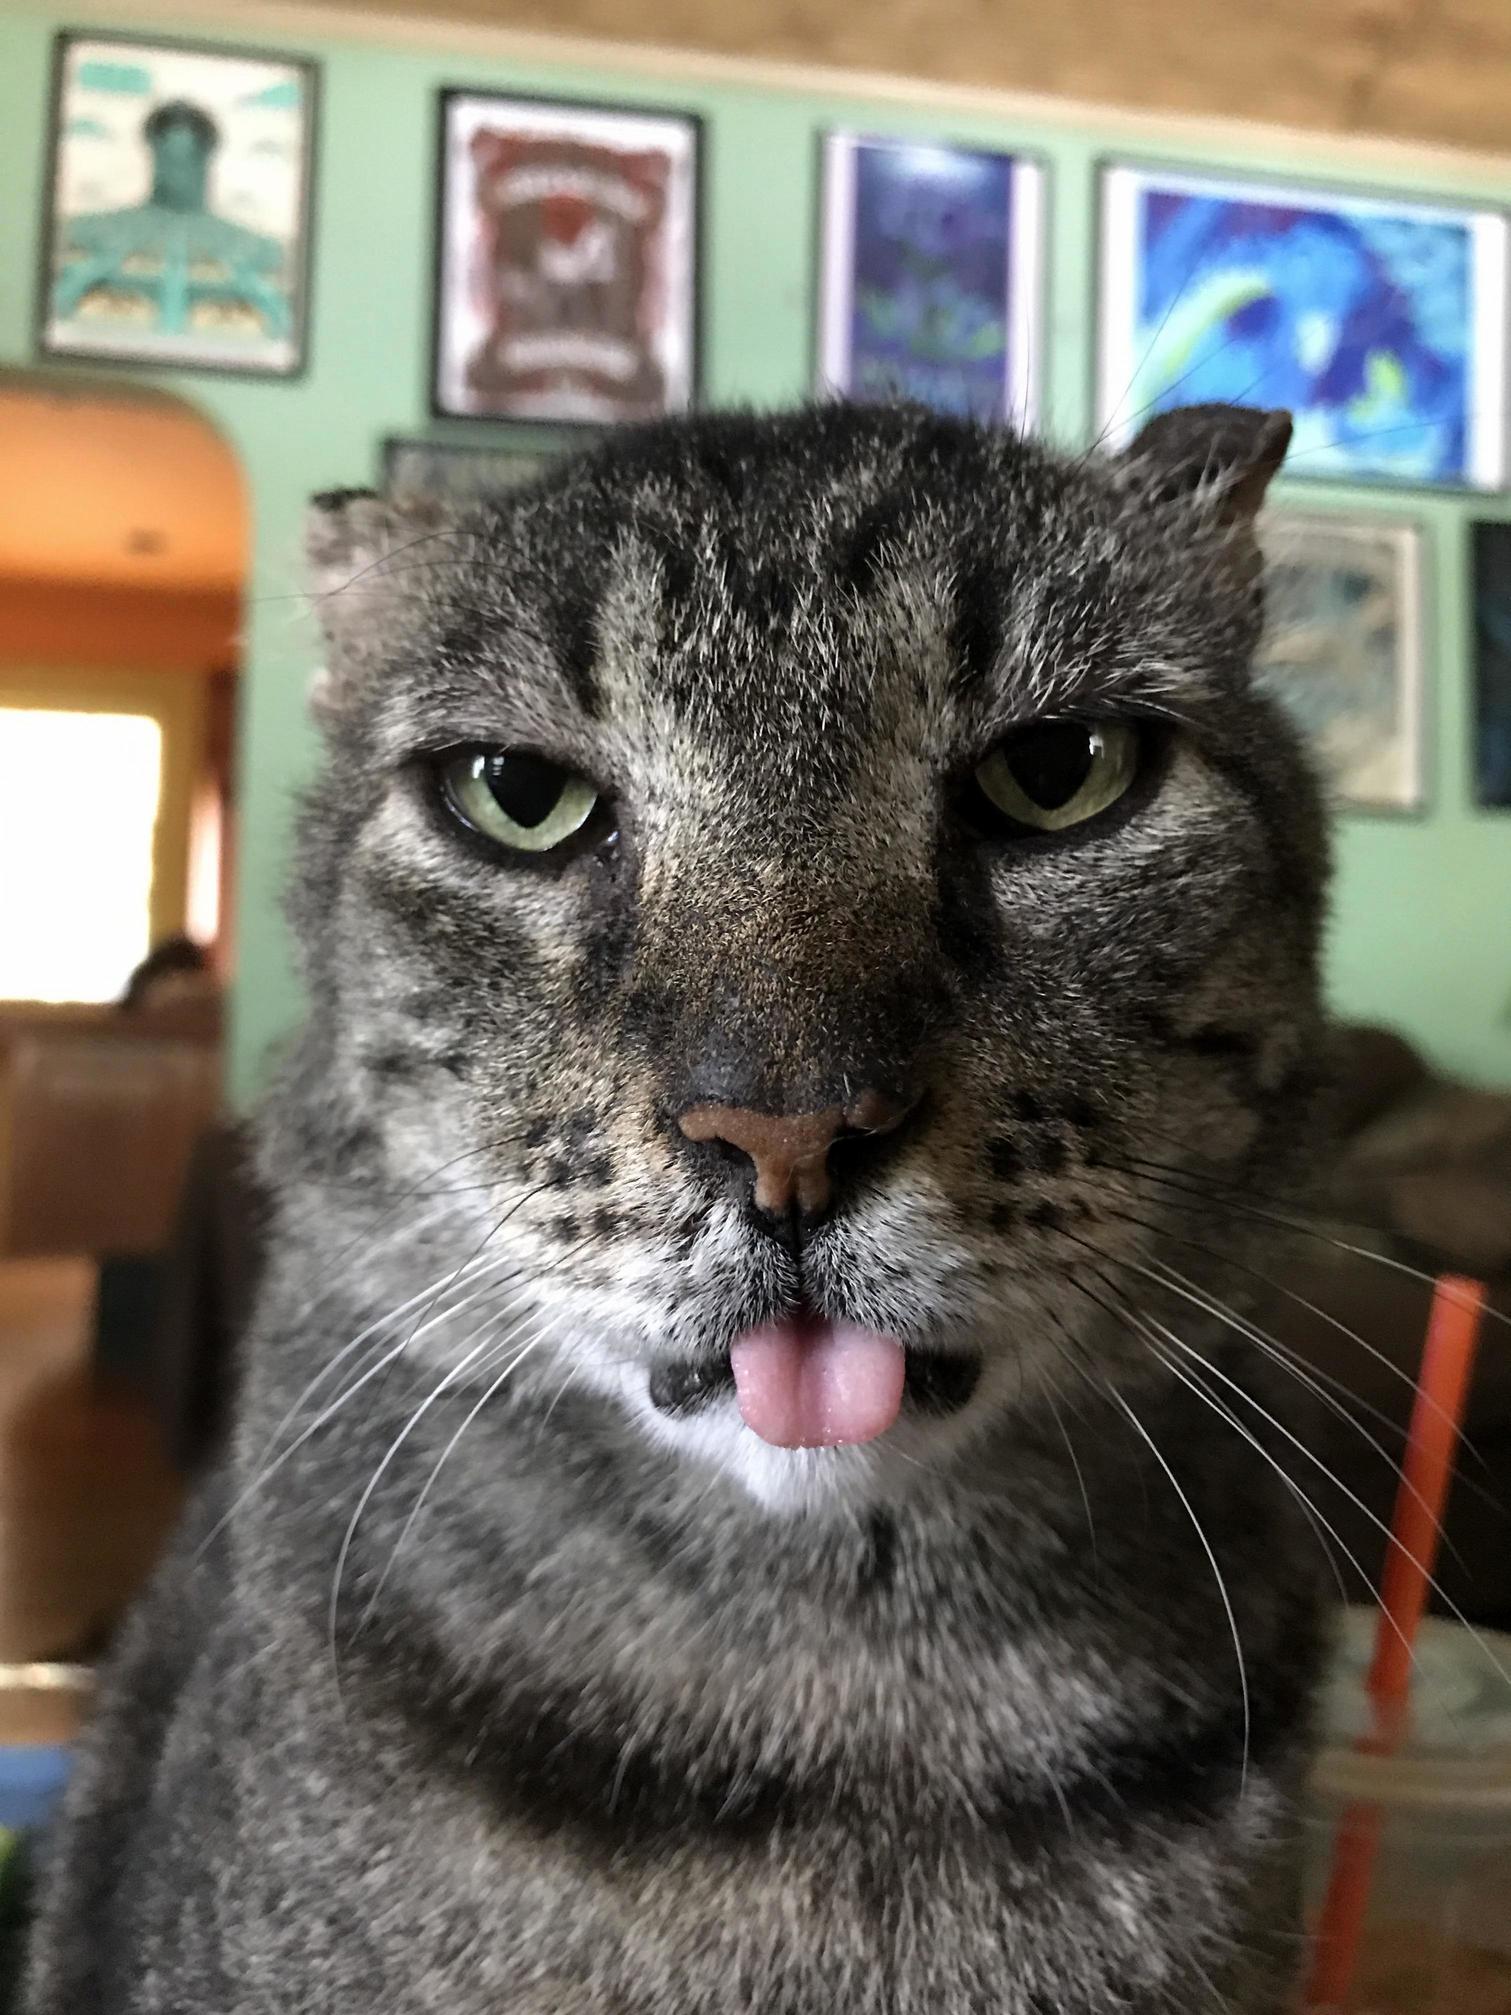 Mr biggs street cat to master blepping house cat